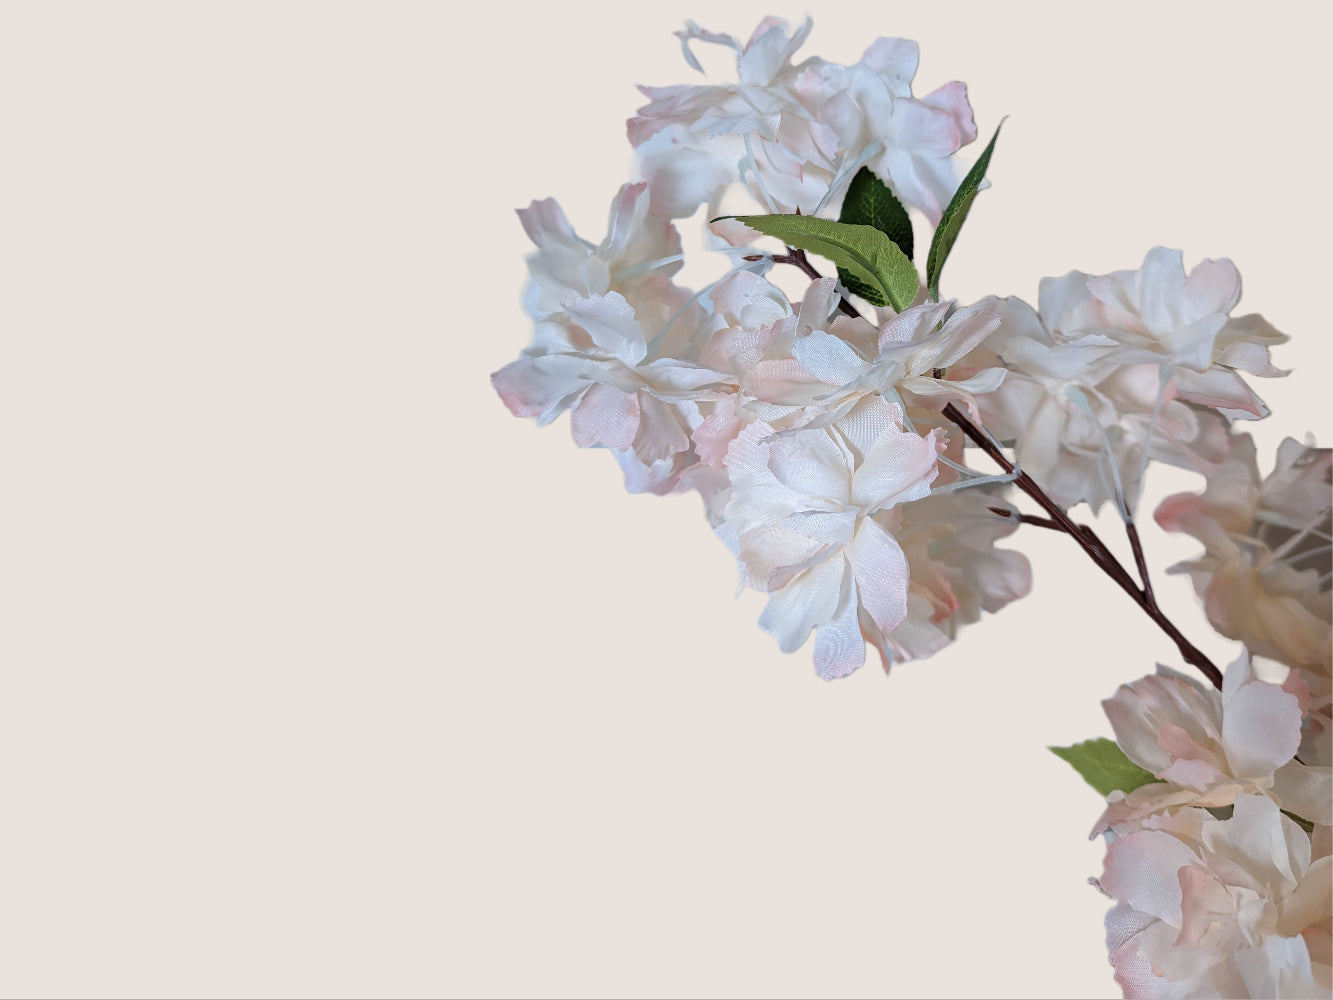 Close-up image of artificial waterfall cherry blossom blooms in soft pink and white with fully opened petals, arranged in a cascading pattern to mimic a waterfall effect. The brown stem, which is 16 inches long, is highly detailed with lifelike texture. Each stem has three branches, and the total height of the image is 38 inches, with 22 inches of blossoms/branches. The image is set against a neutral beige background.